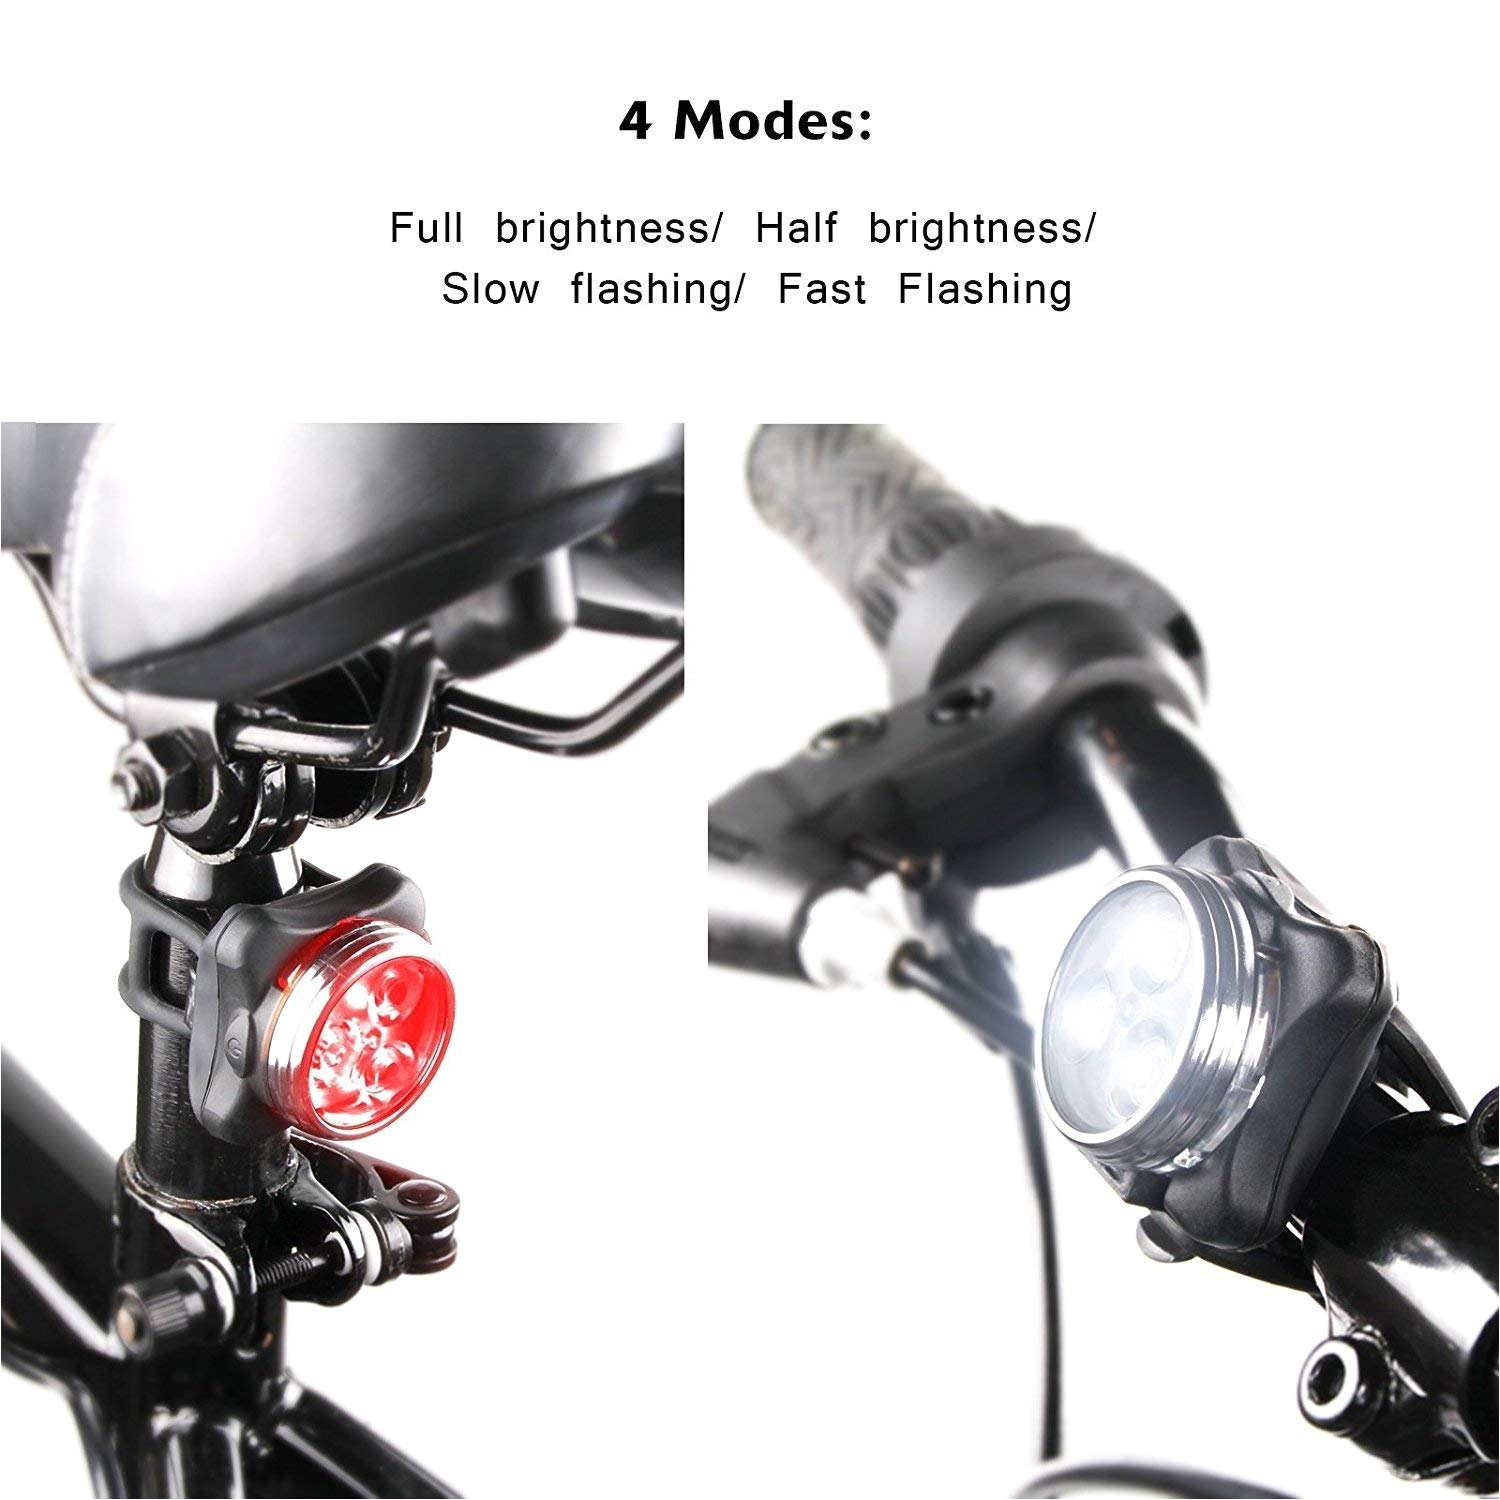 amazon com dubut21 super bright bicycle light set usb rechargeable bike headlight free tail light waterproof led bike light easy to install cycling safety